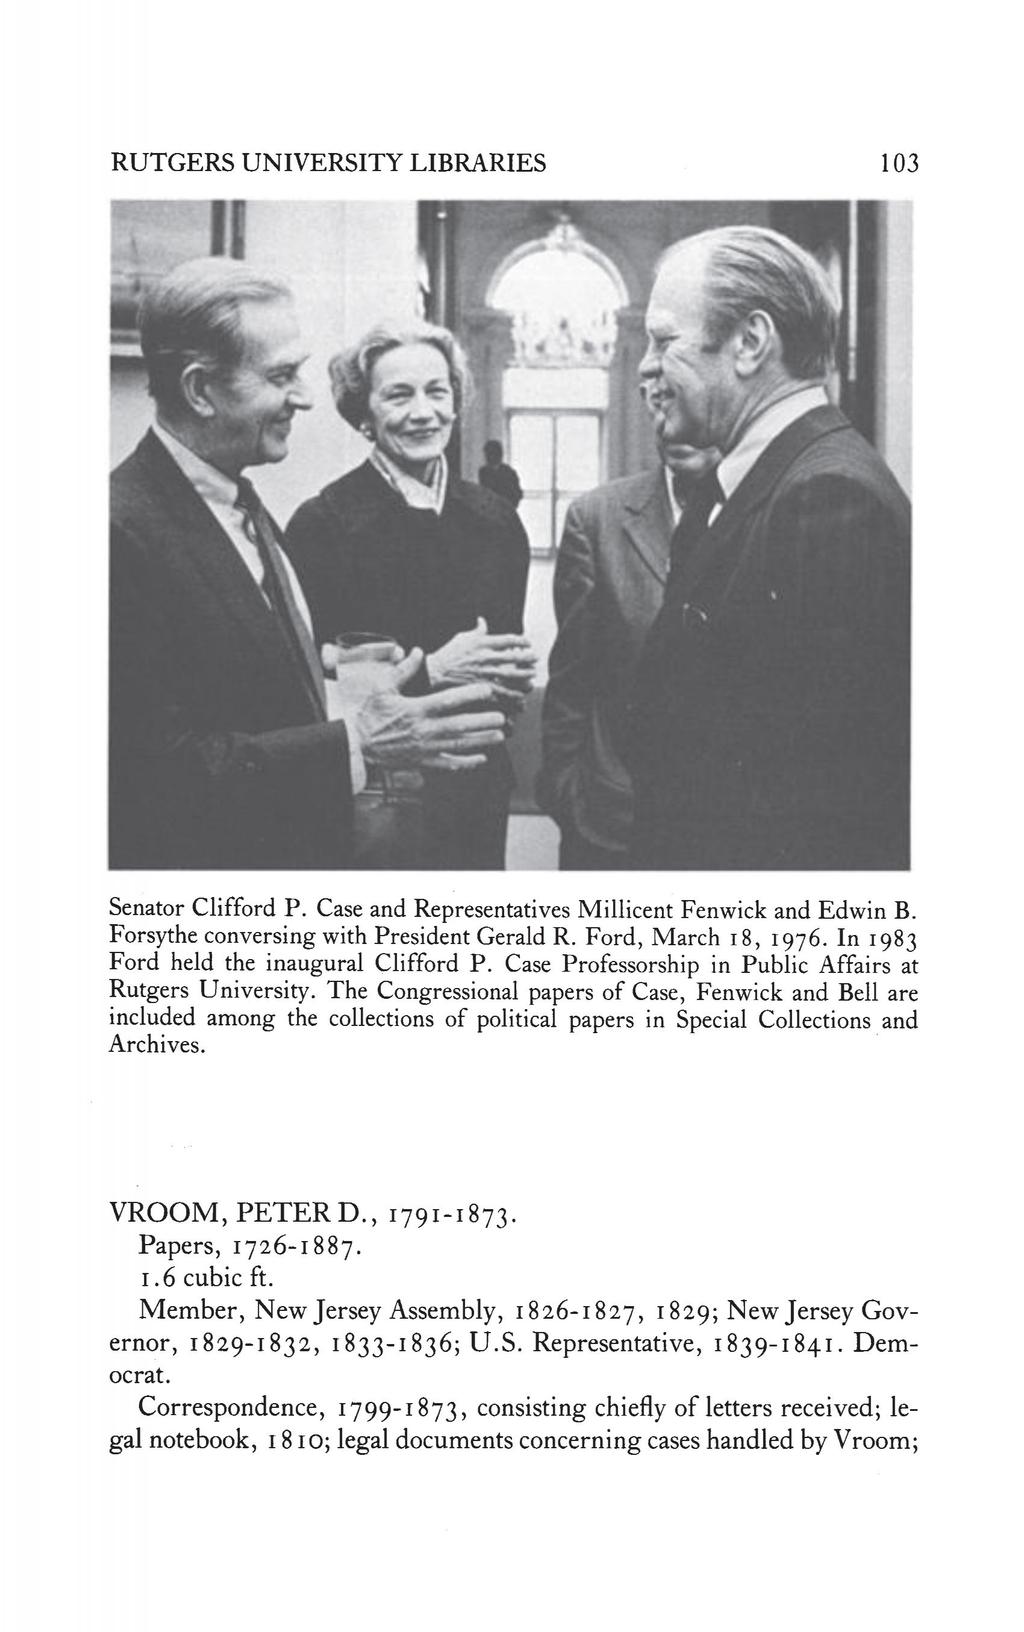 RUTGERS UNIVERSITY LIBRARIES 103 Senator Clifford P. Case and Representatives Millicent Fenwick and Edwin B. Forsythe conversing with President Gerald R. Ford, March 18, 1976.